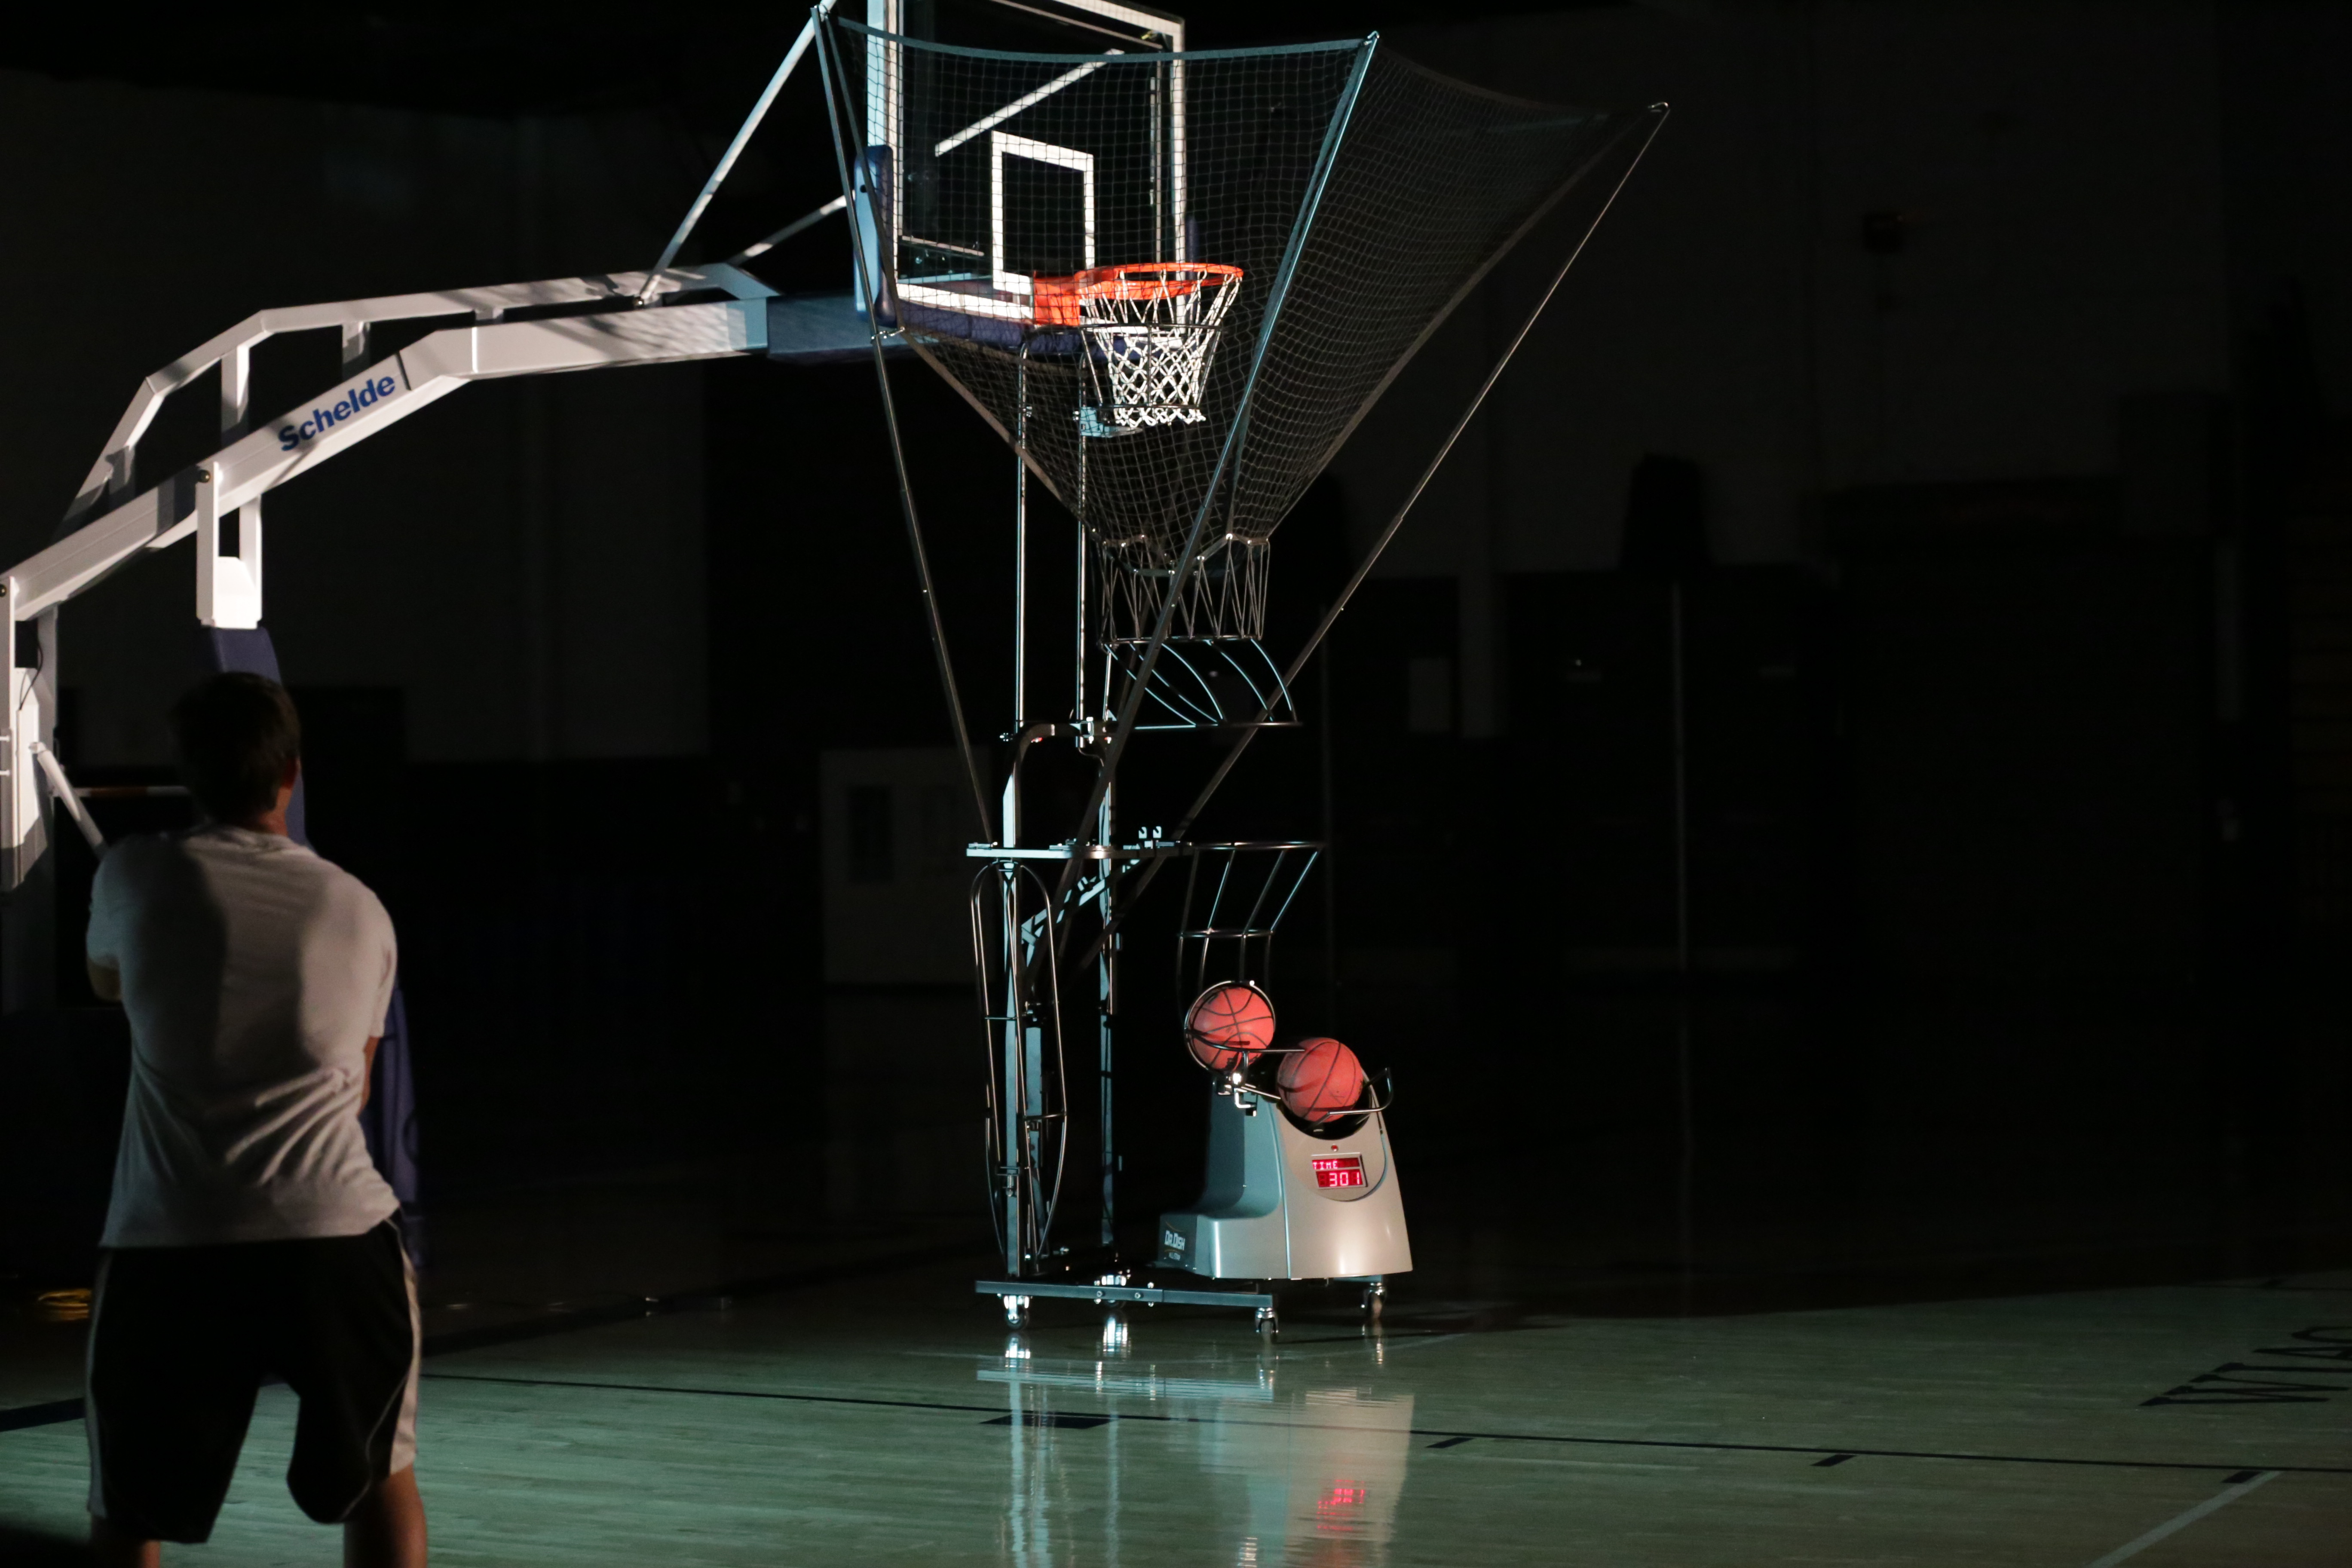 Basketball Shooting: 3 Easy Ways to Improve Your Shot